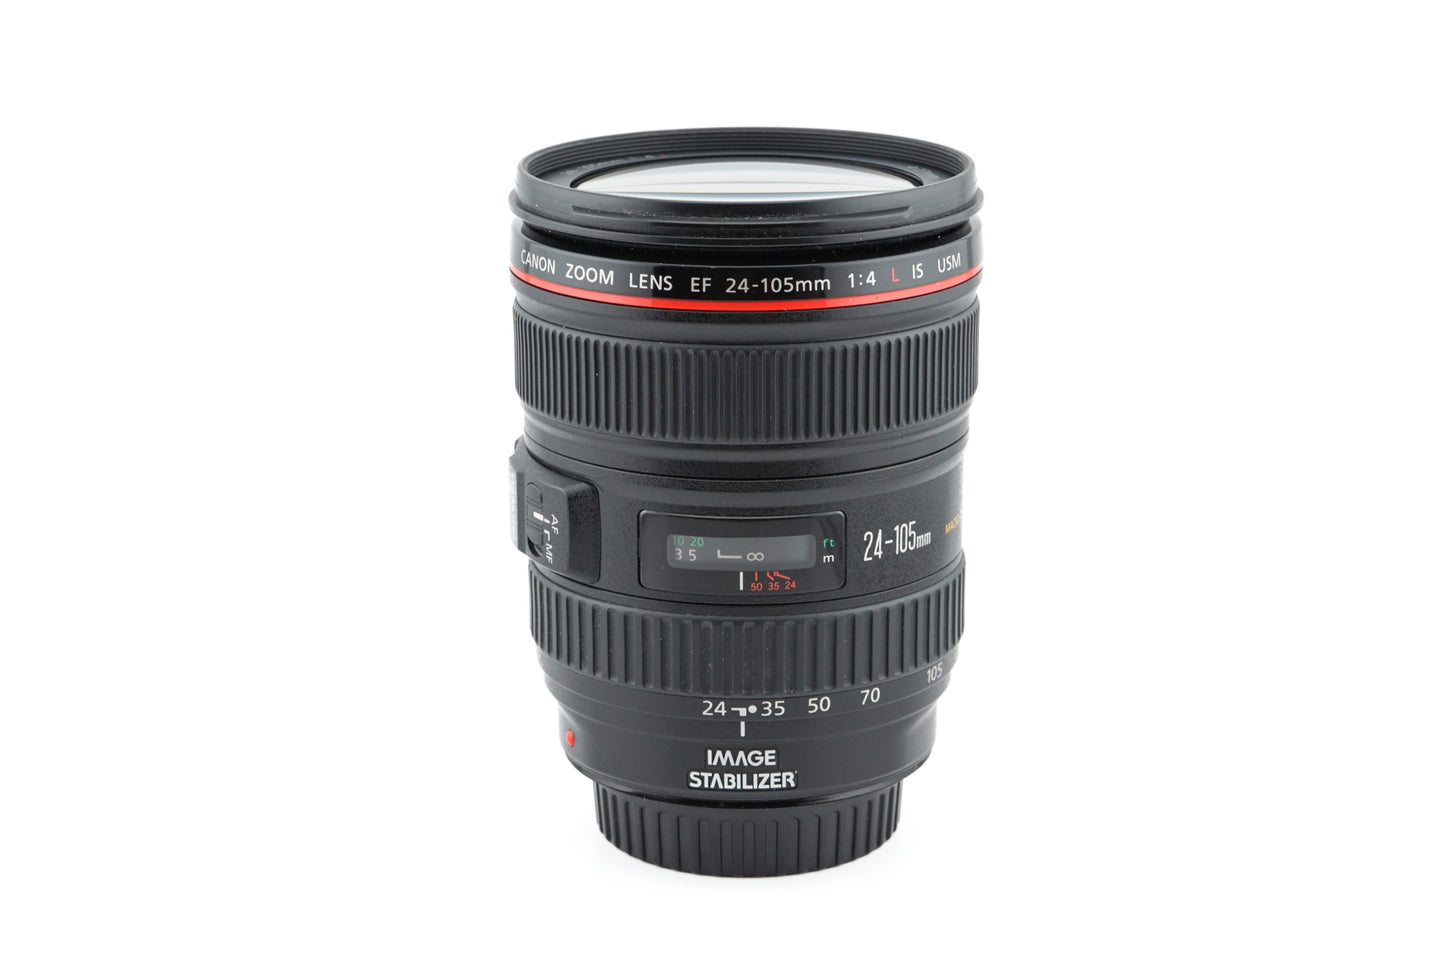 Canon 24-105mm f4 L IS USM - Lens